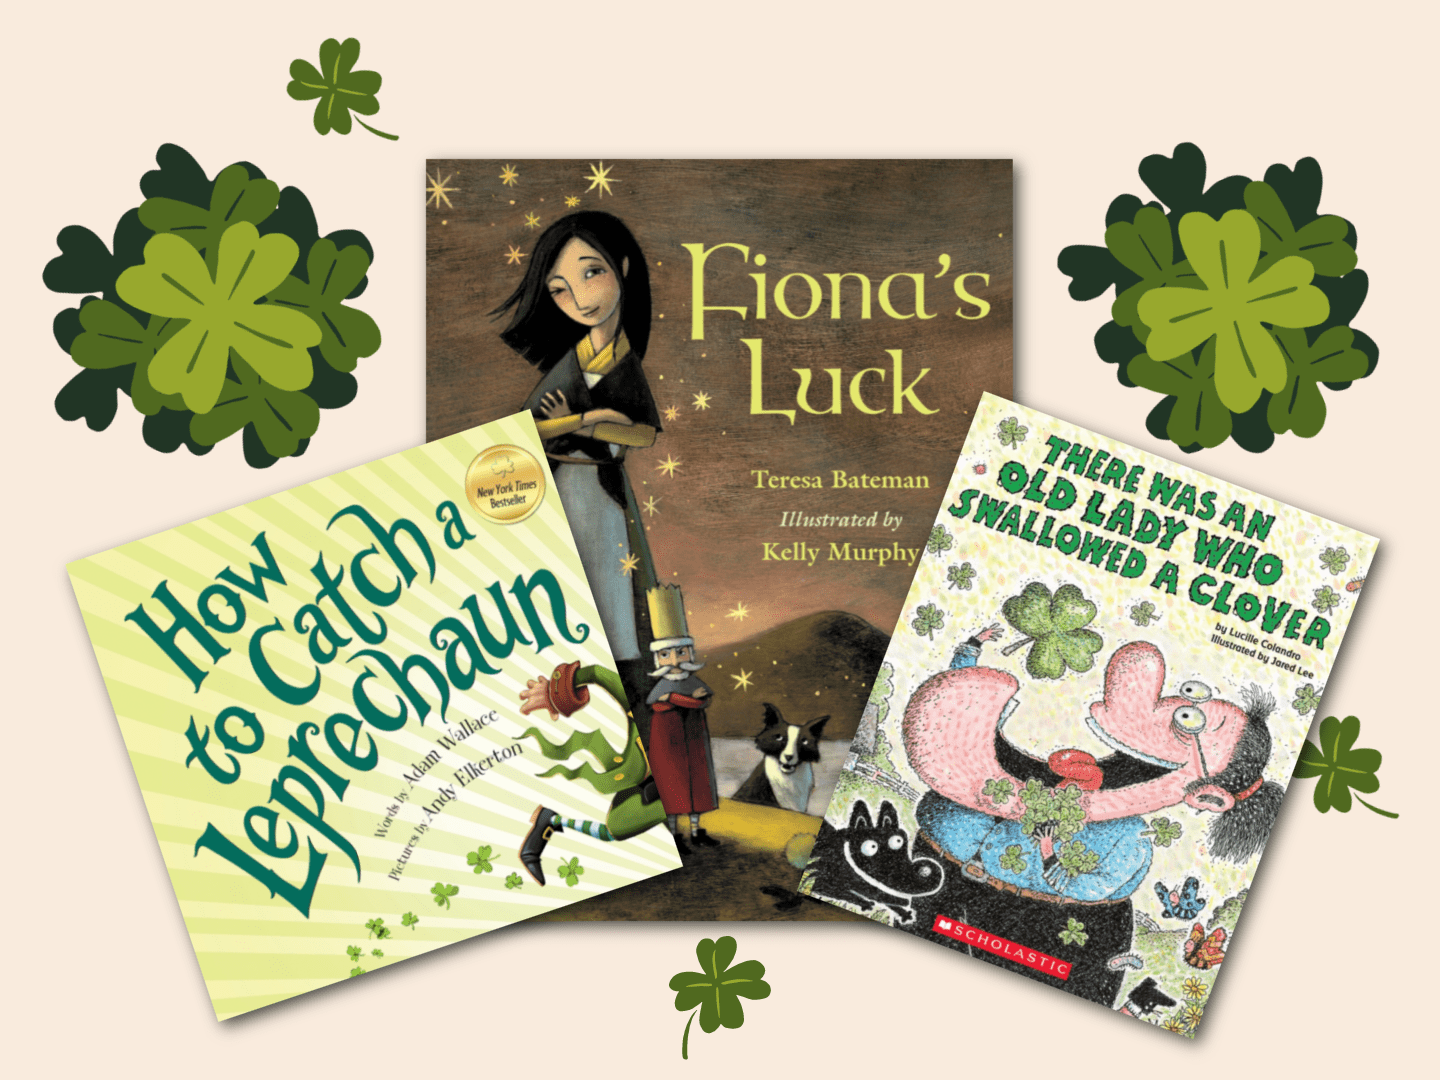 St. Patrick's Day Books for Kids